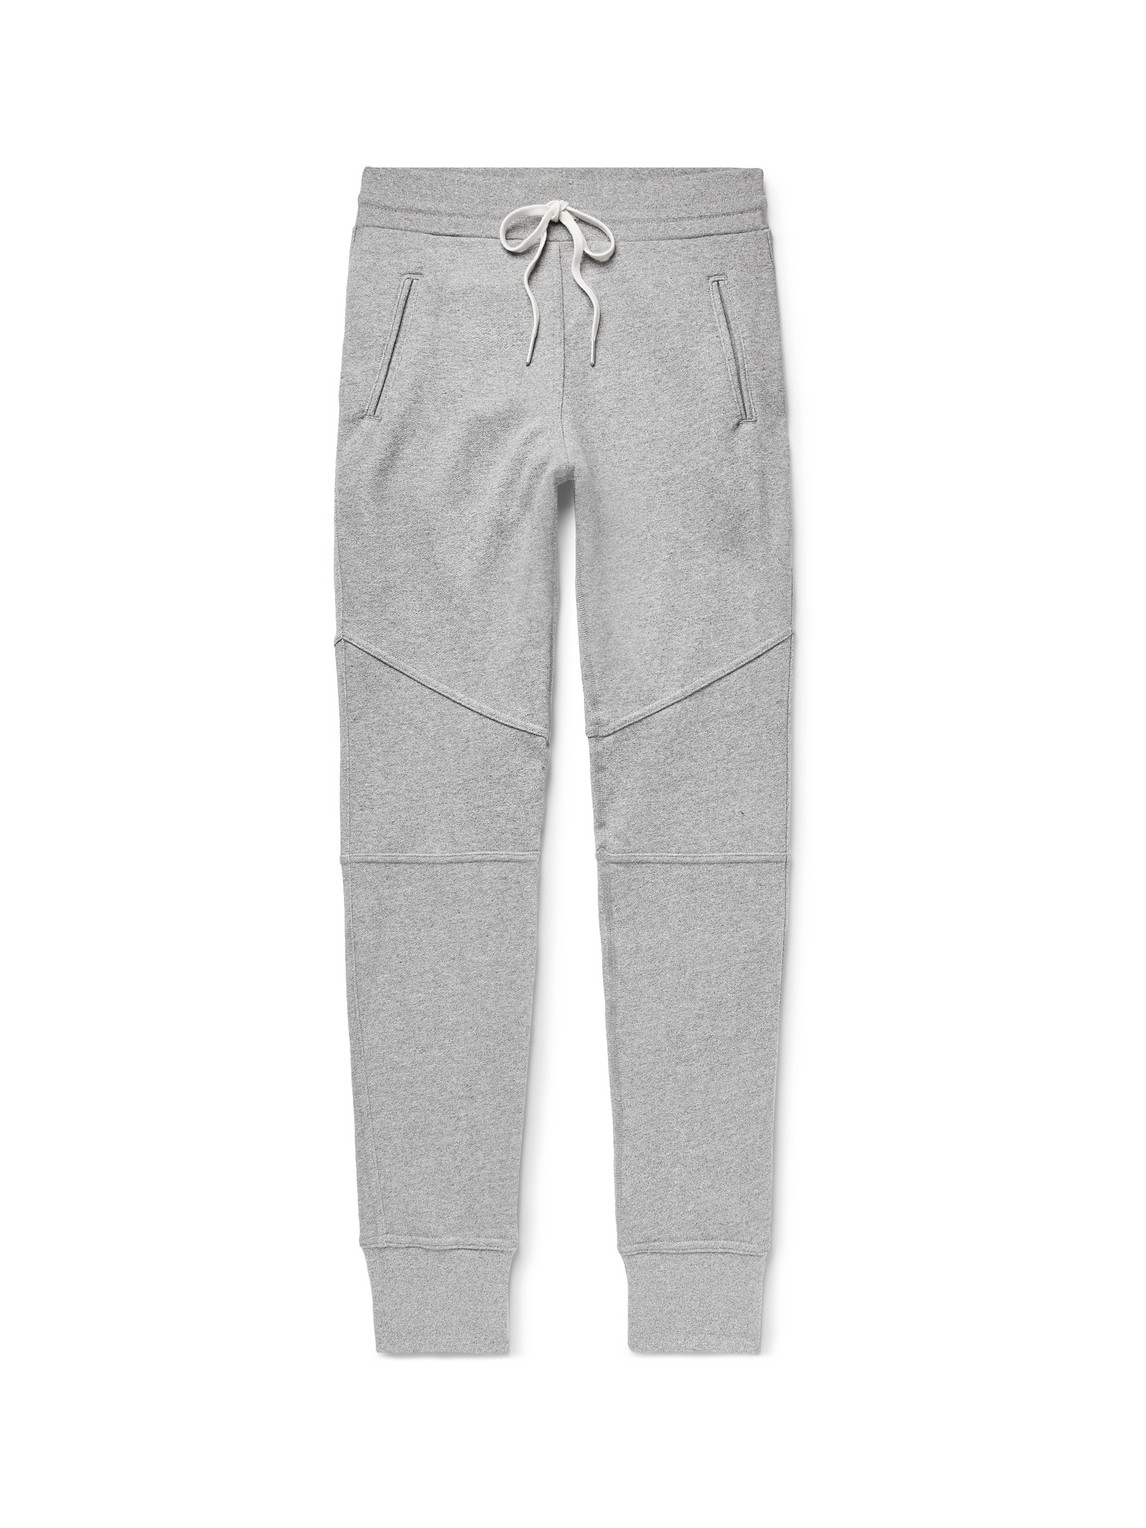 Escobar Slim-Fit Tapered Loopback Cotton-Blend Jersey Sweatpants